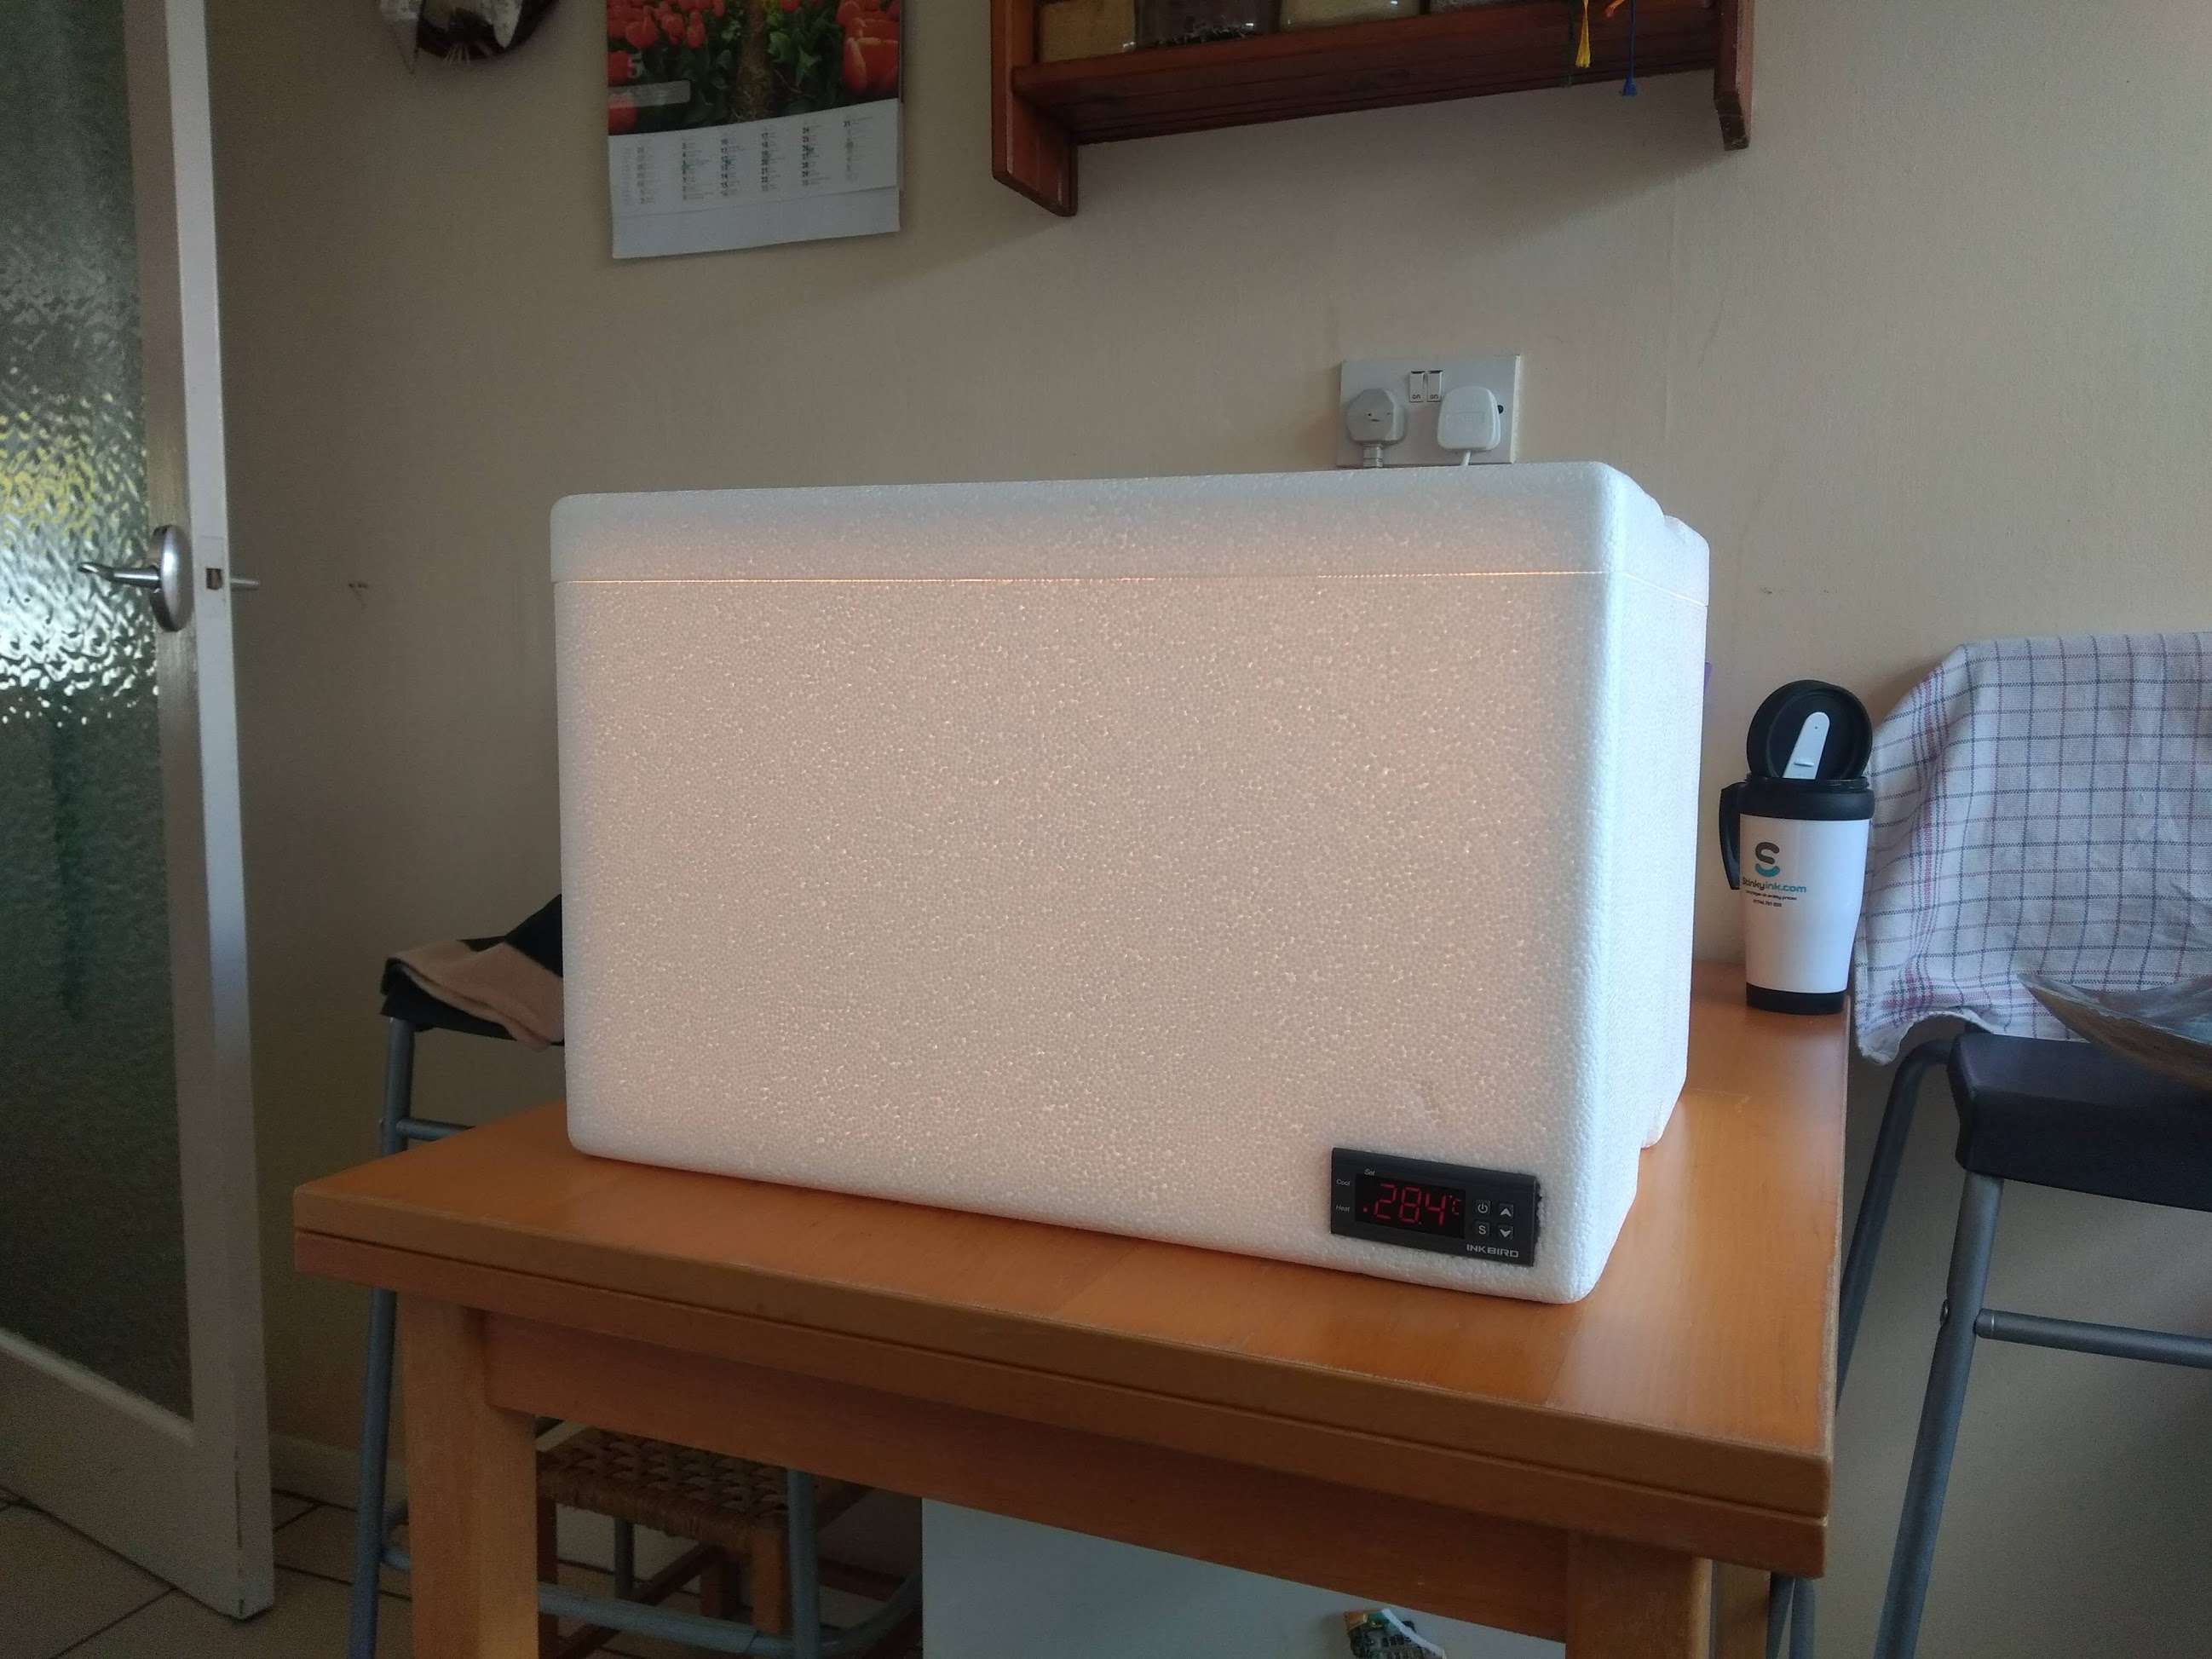 https://www.dmcmillan.co.uk/user/pages/03.blog/how-to-build-an-electric-bread-proofing-box/IMG_20210519_152540847.jpg